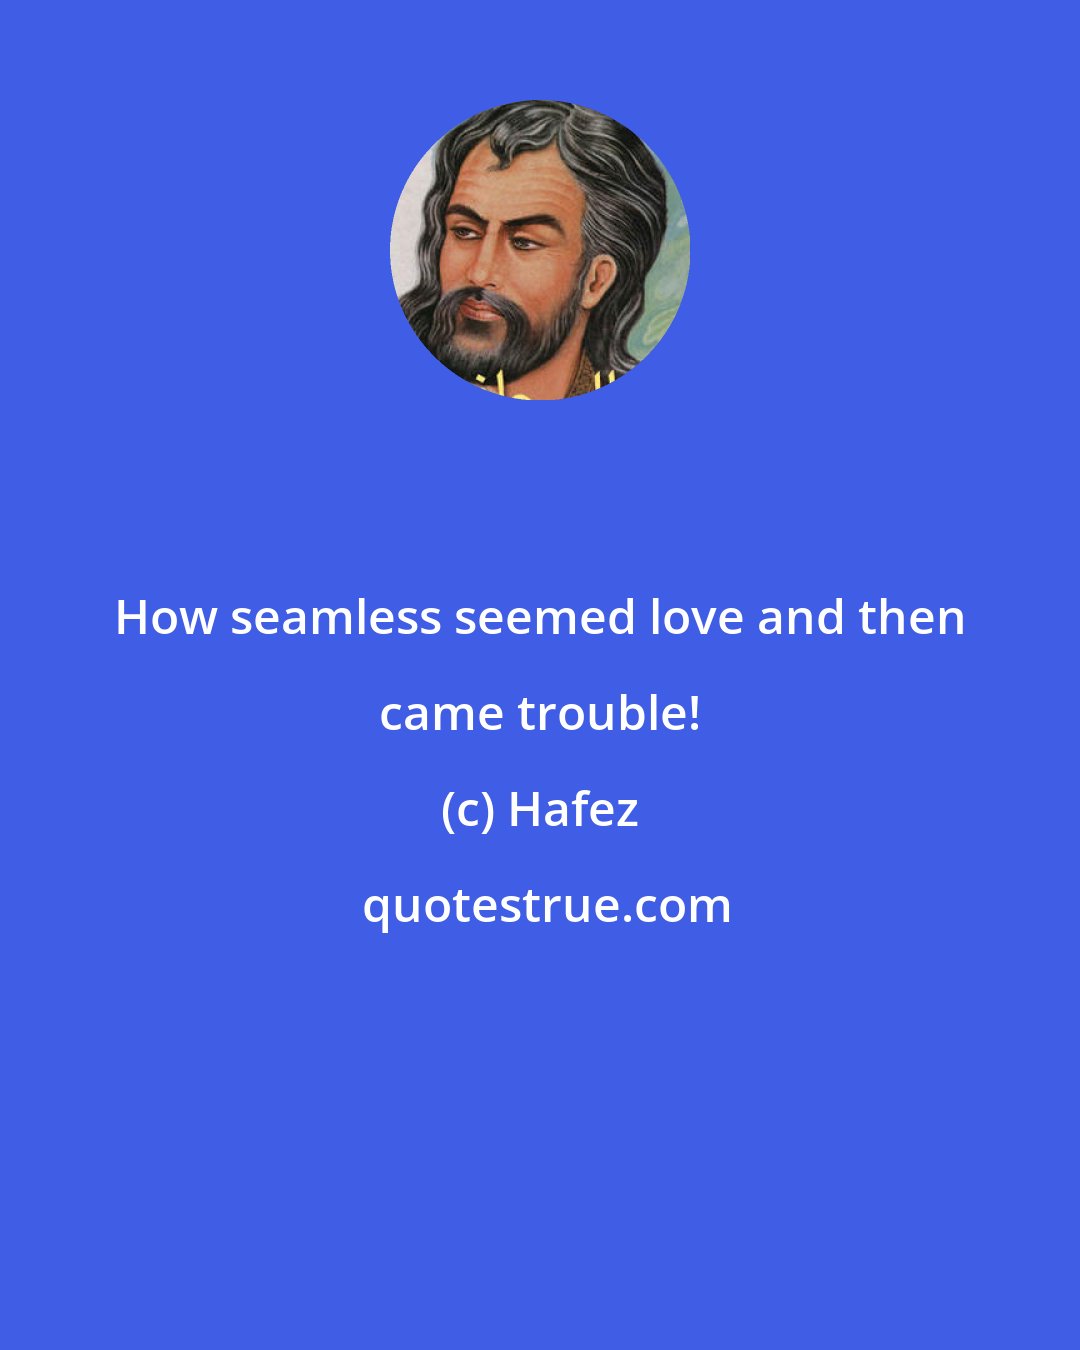 Hafez: How seamless seemed love and then came trouble!